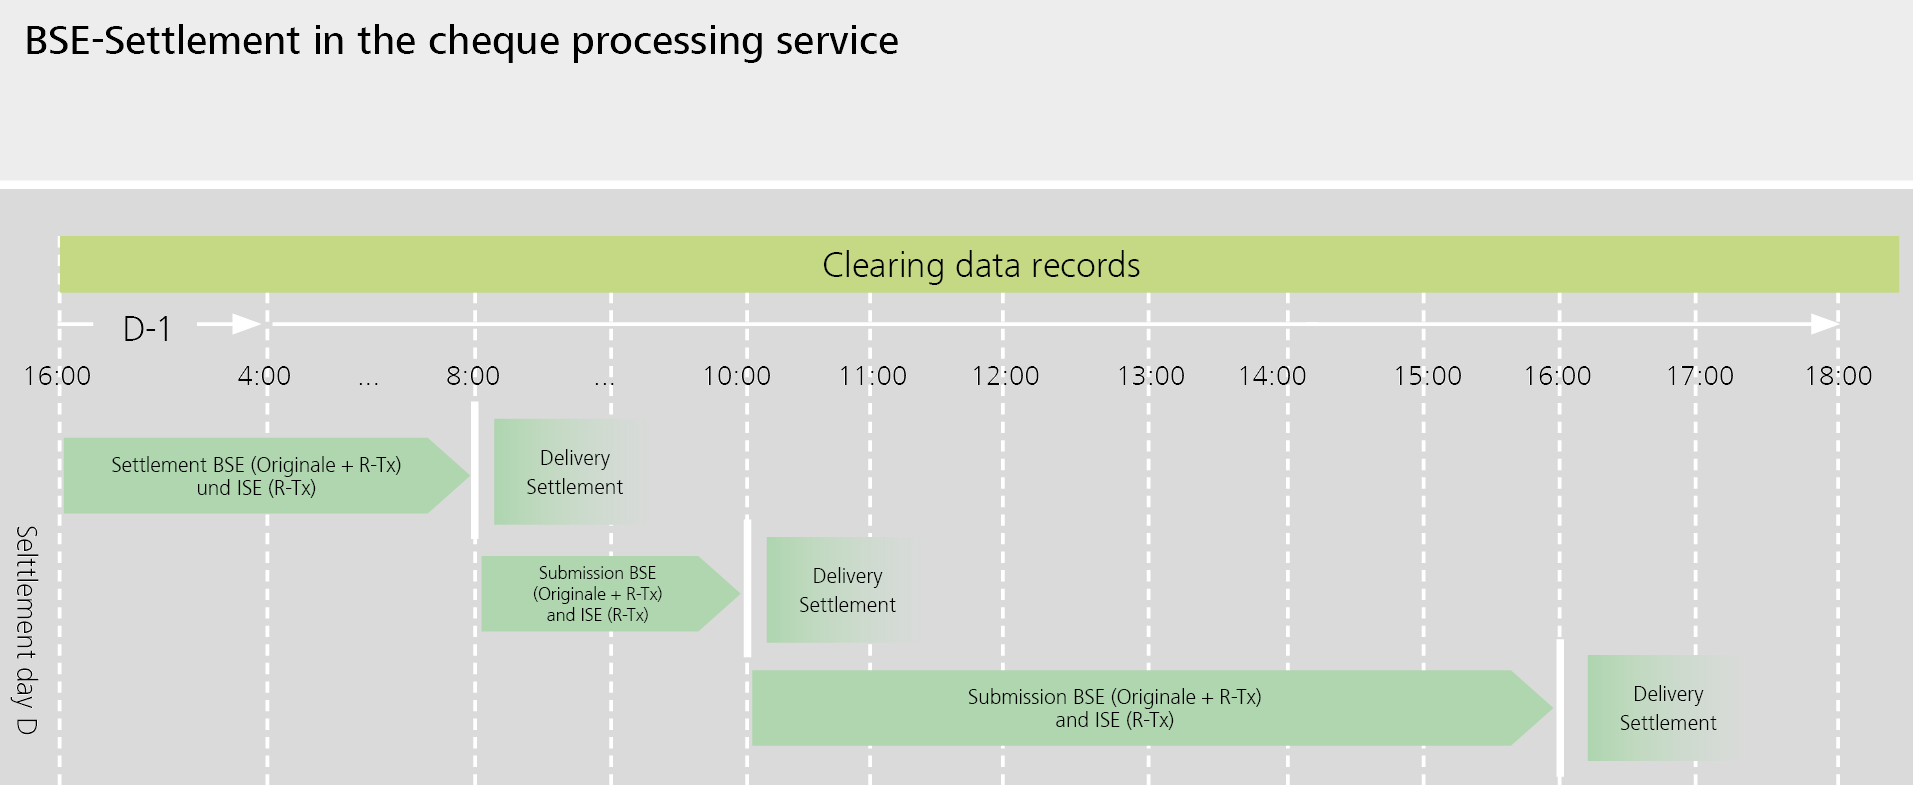 Processing windows for the clearing and settlement of BSE and ISE payments